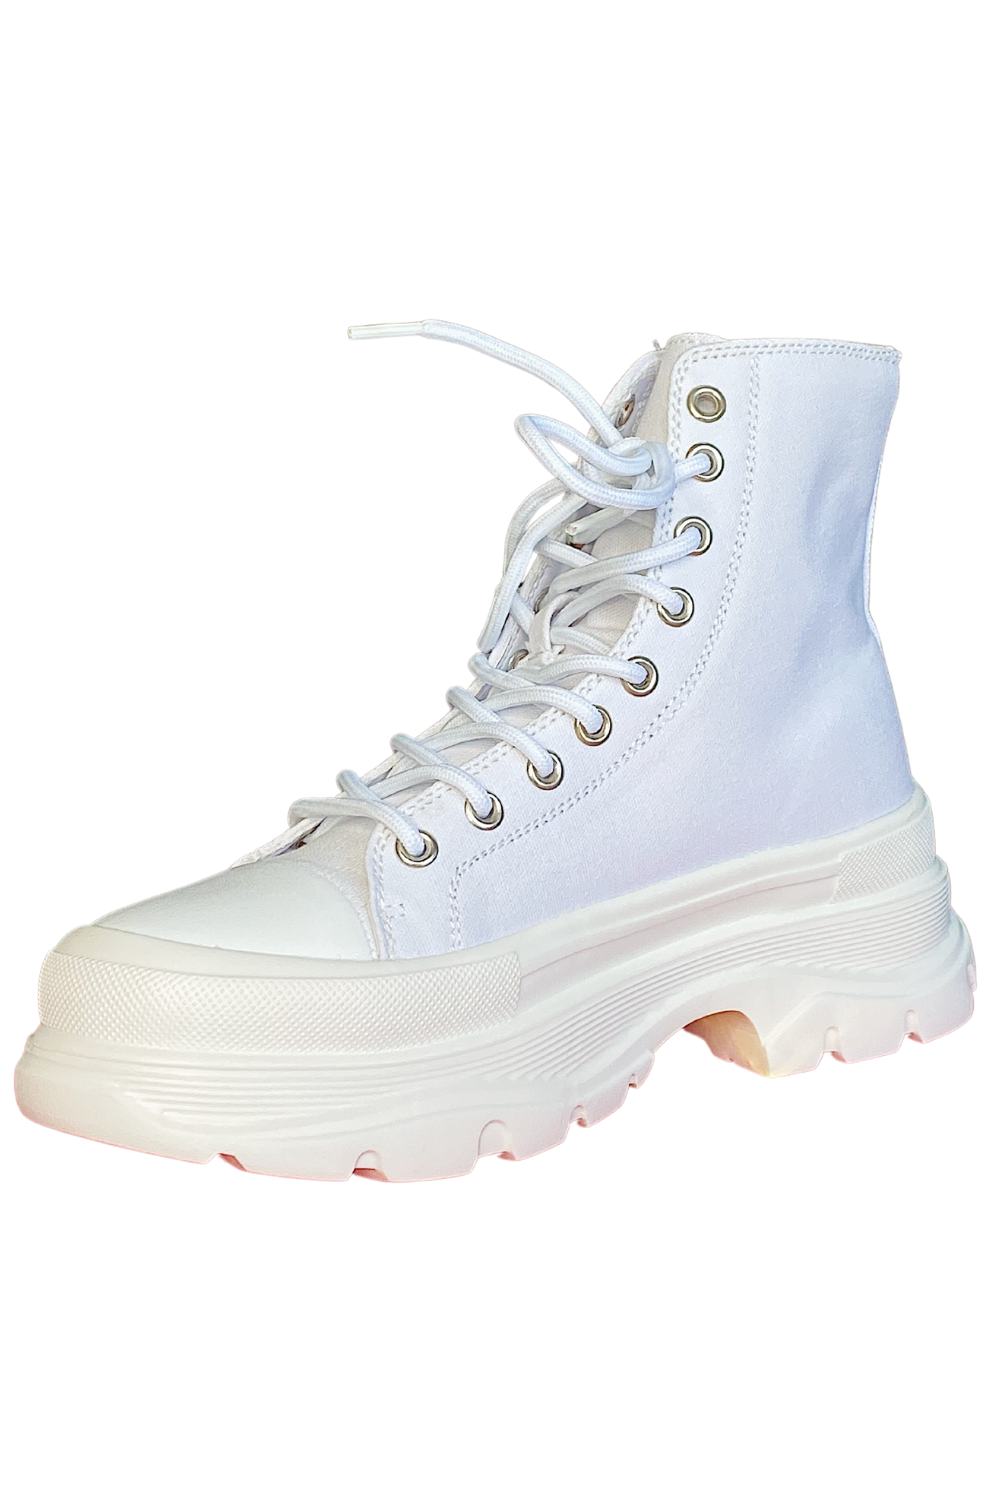 DOWNTOWN ULTRA CHUNKY HIGH TOP SNEAKS - cedes